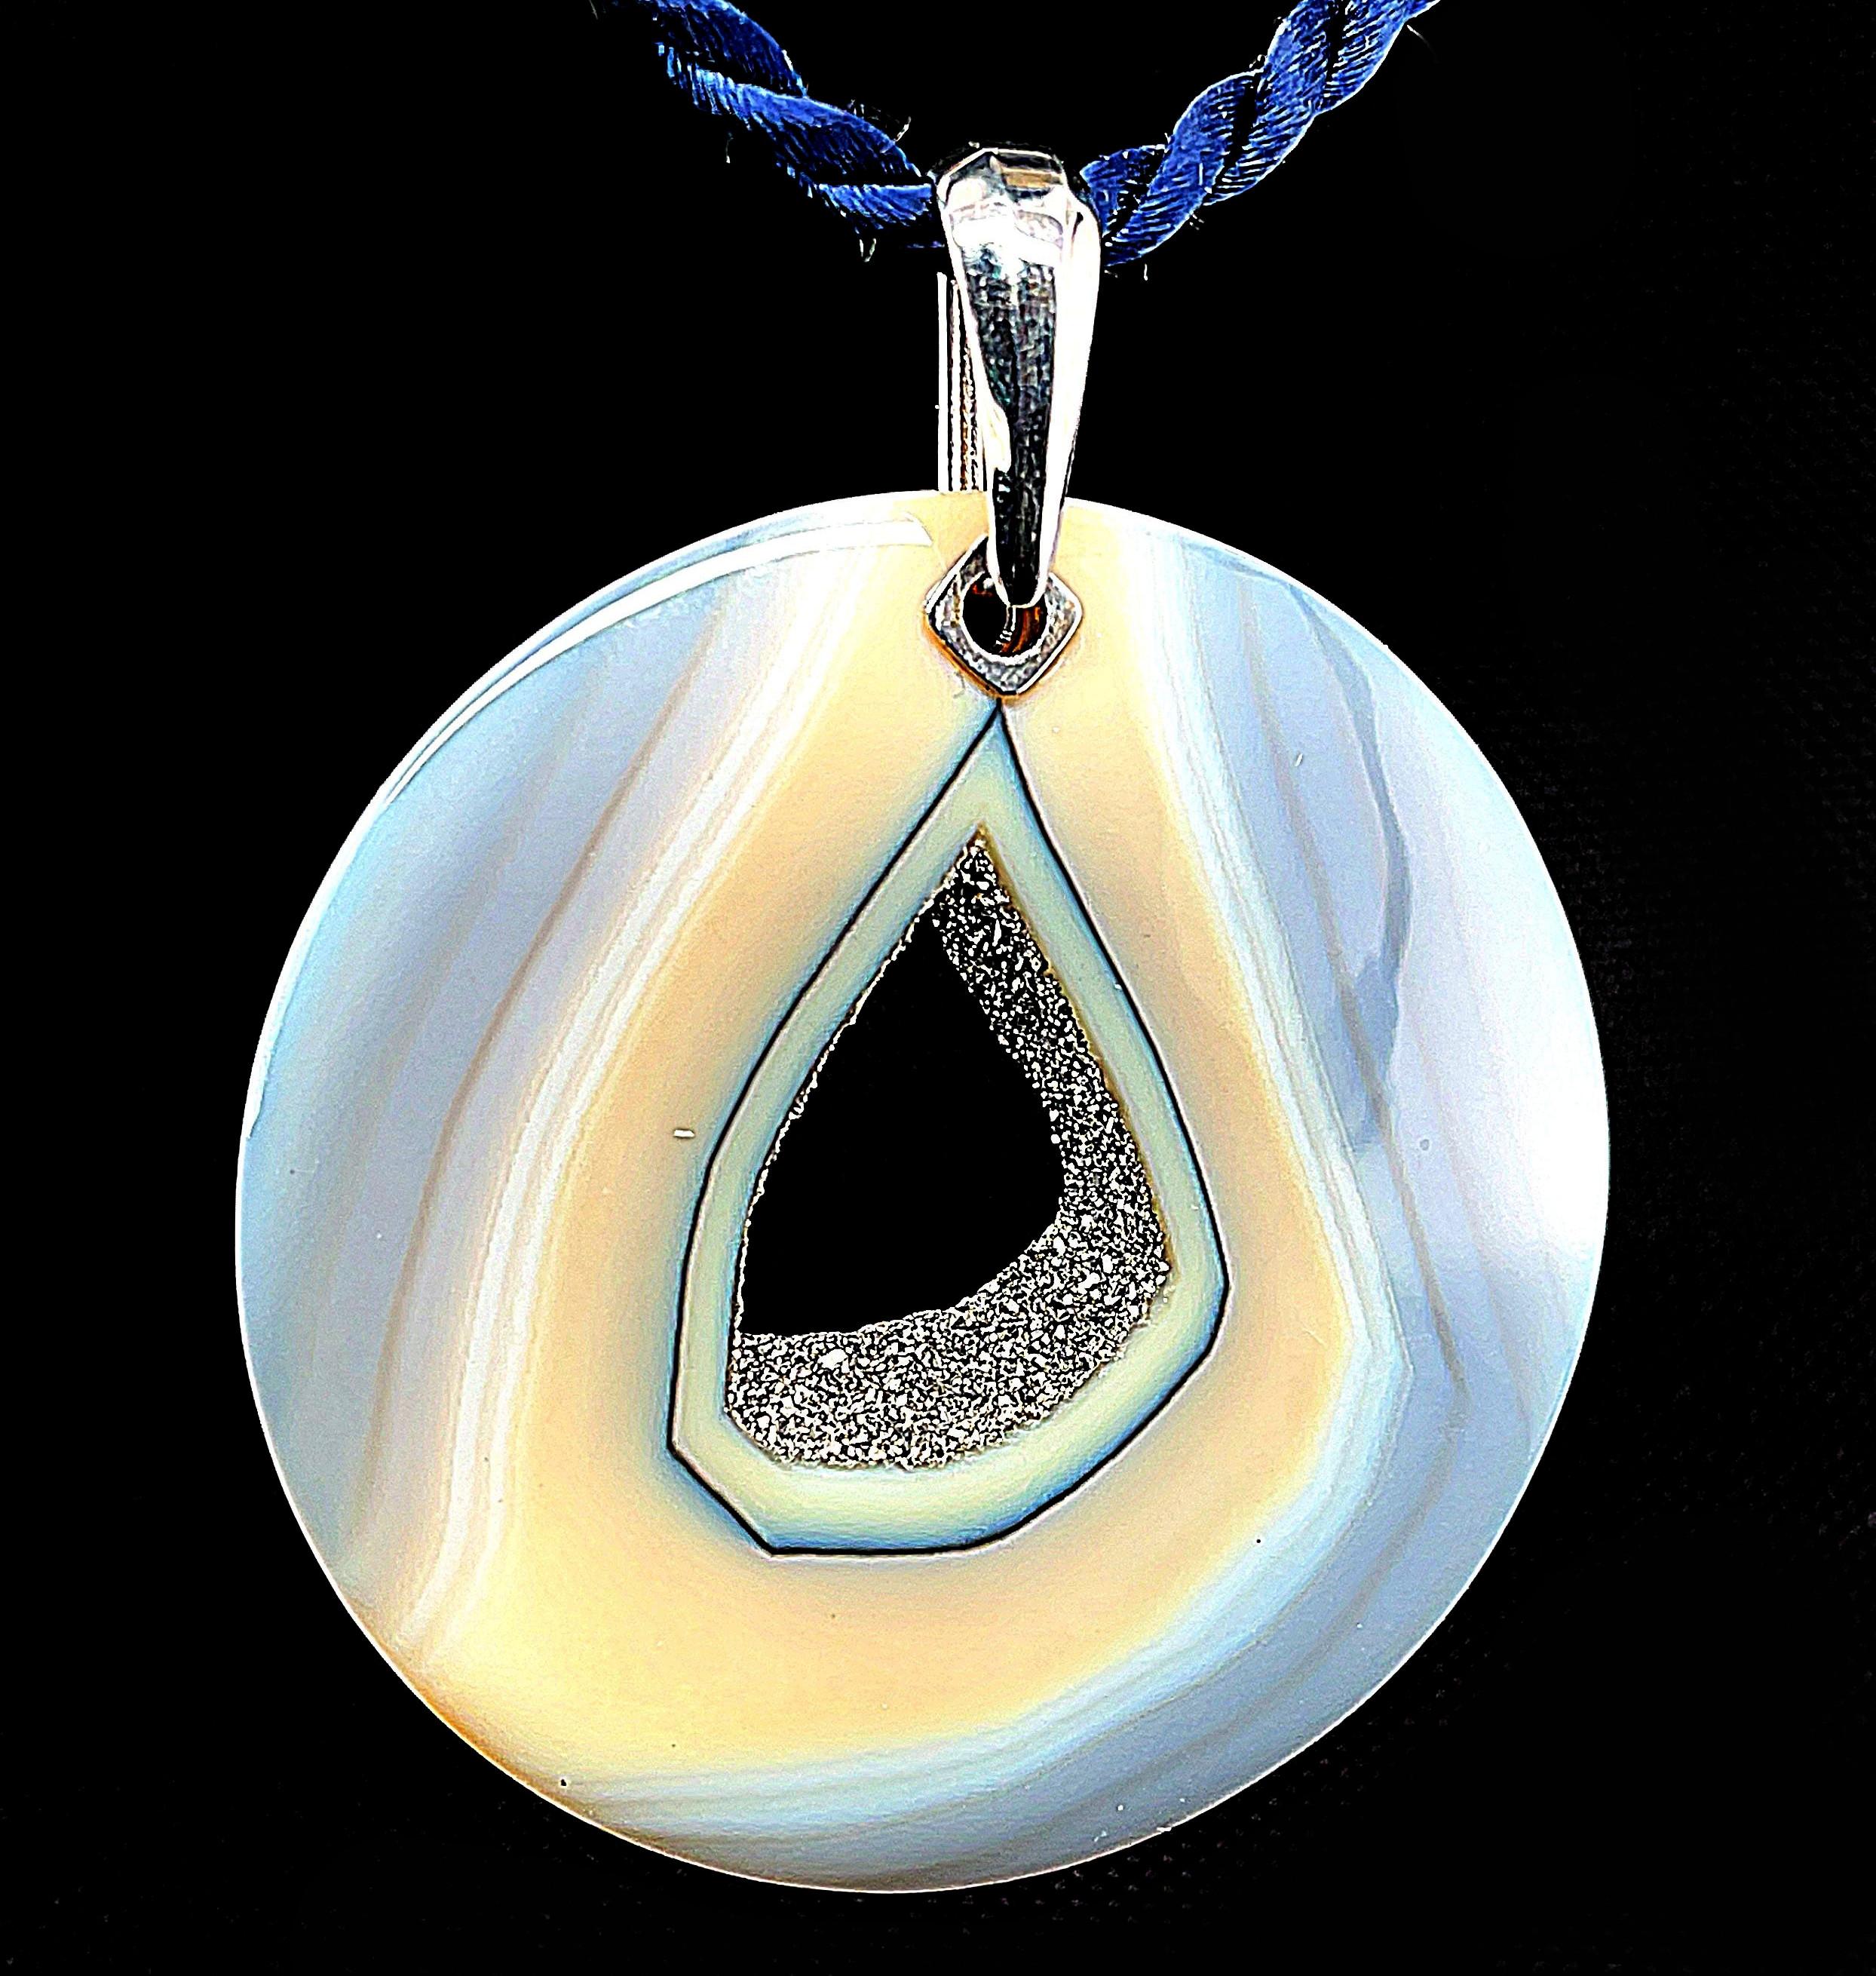 A large, polished druzy quartz agate is suspended from a bright 14k white gold bail in this stunning statement pendant. Druzy agate is a natural gemstone and this particular gem has beautiful color striations in beige and bluish gray tones that will